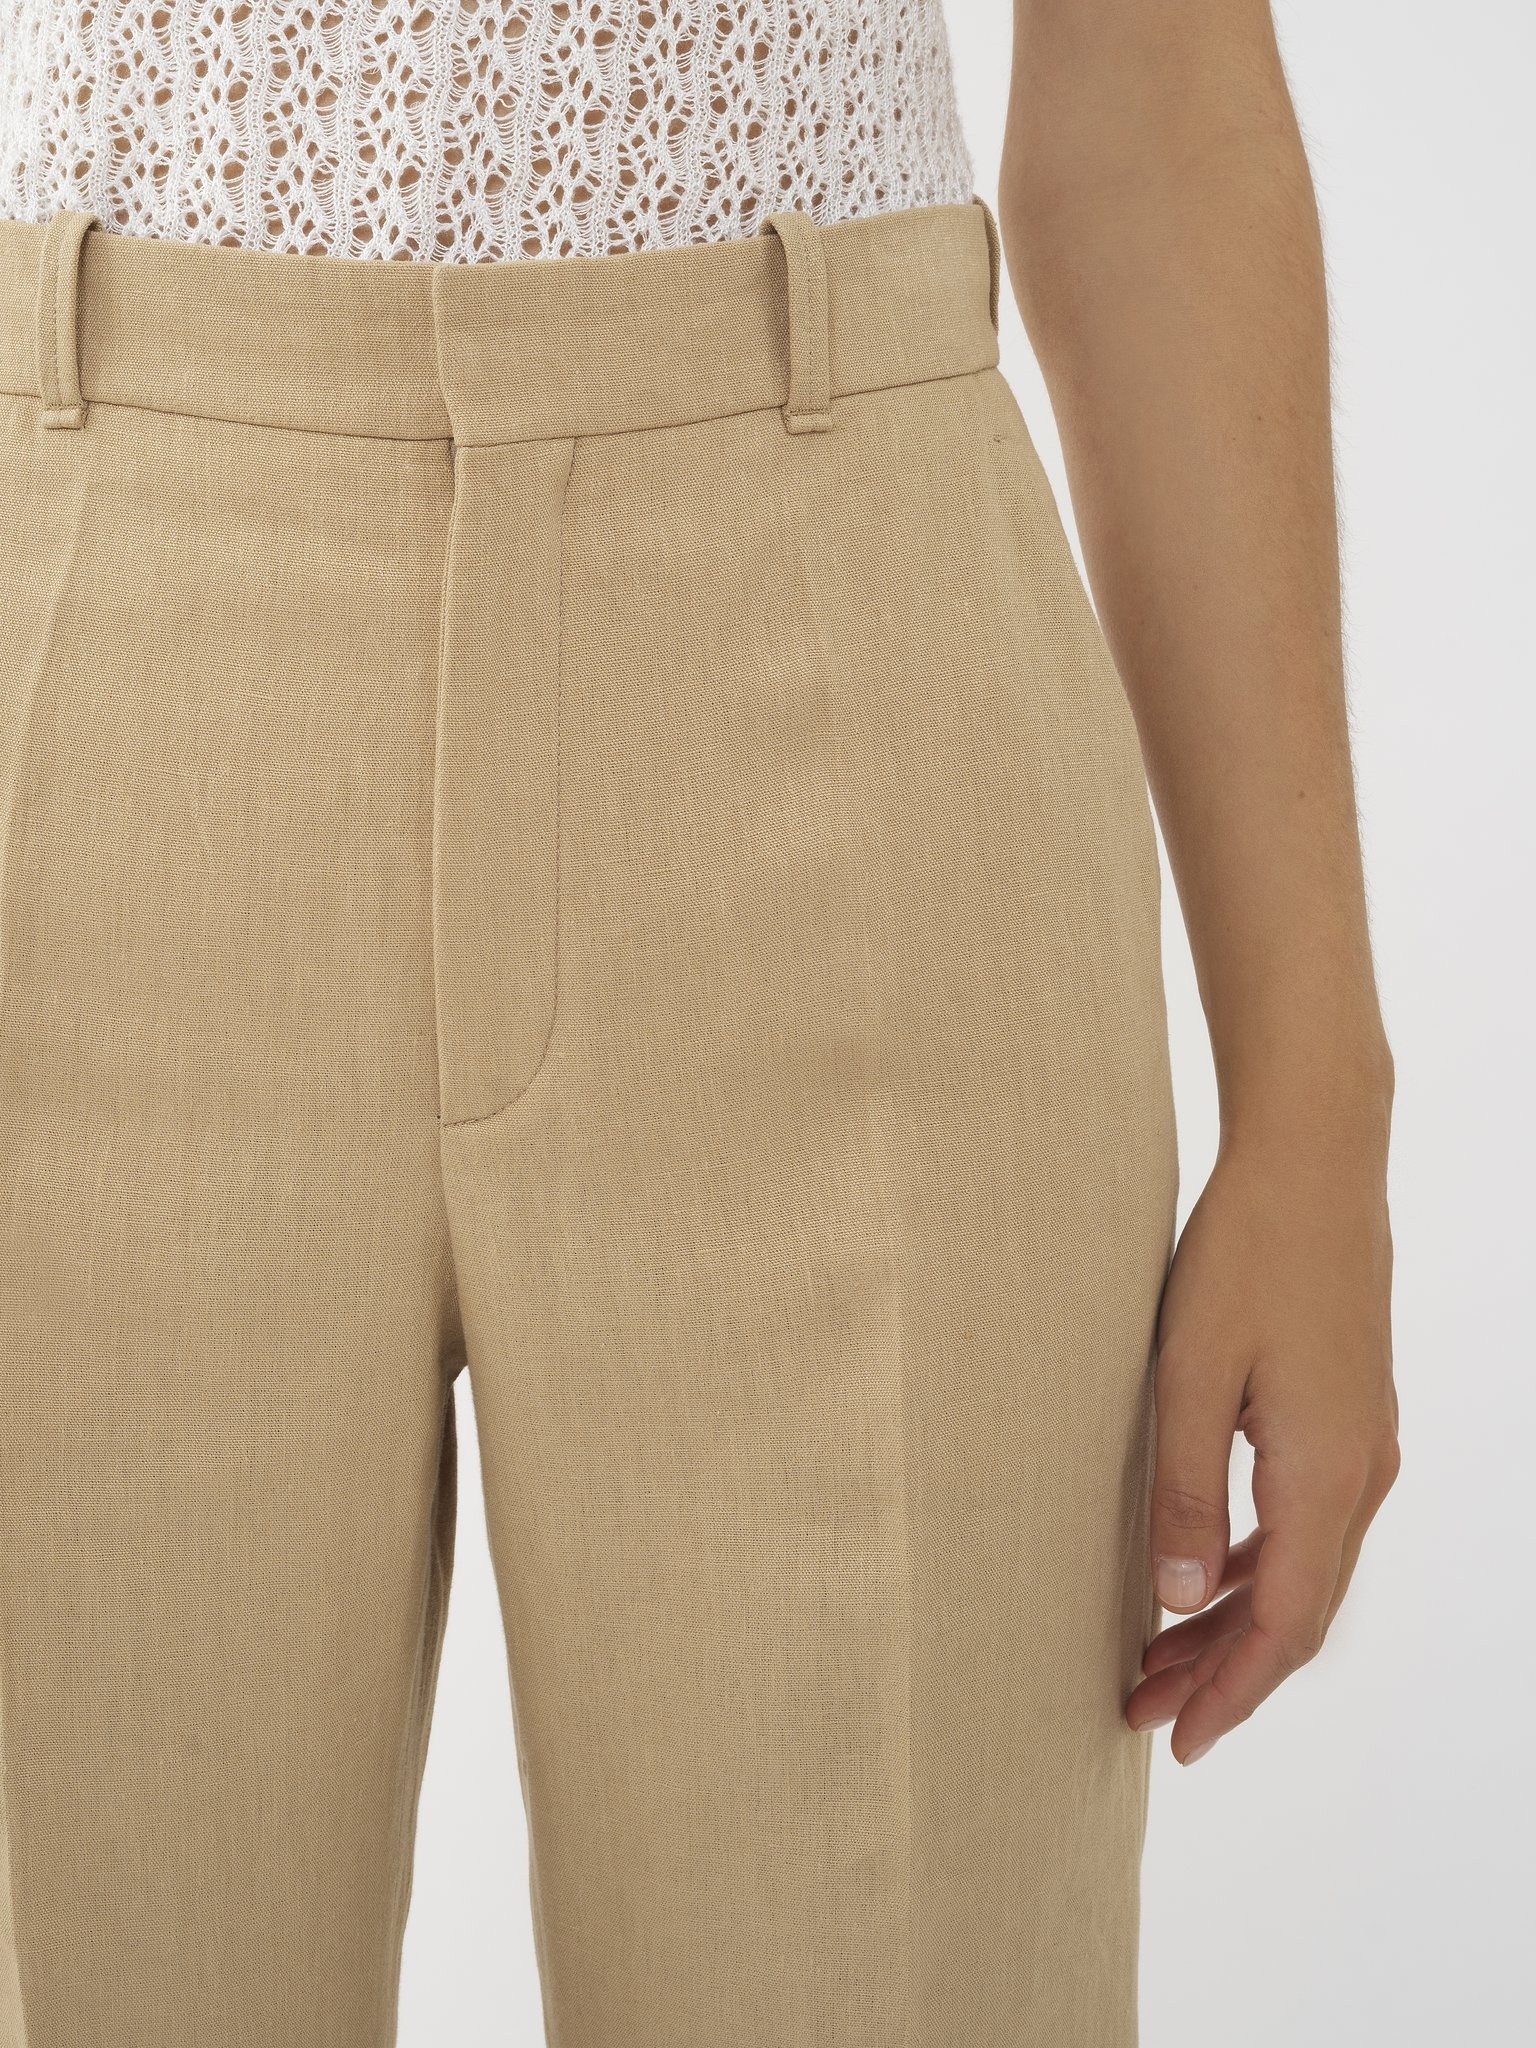 HIGH-RISE TAILORED PANTS - 6